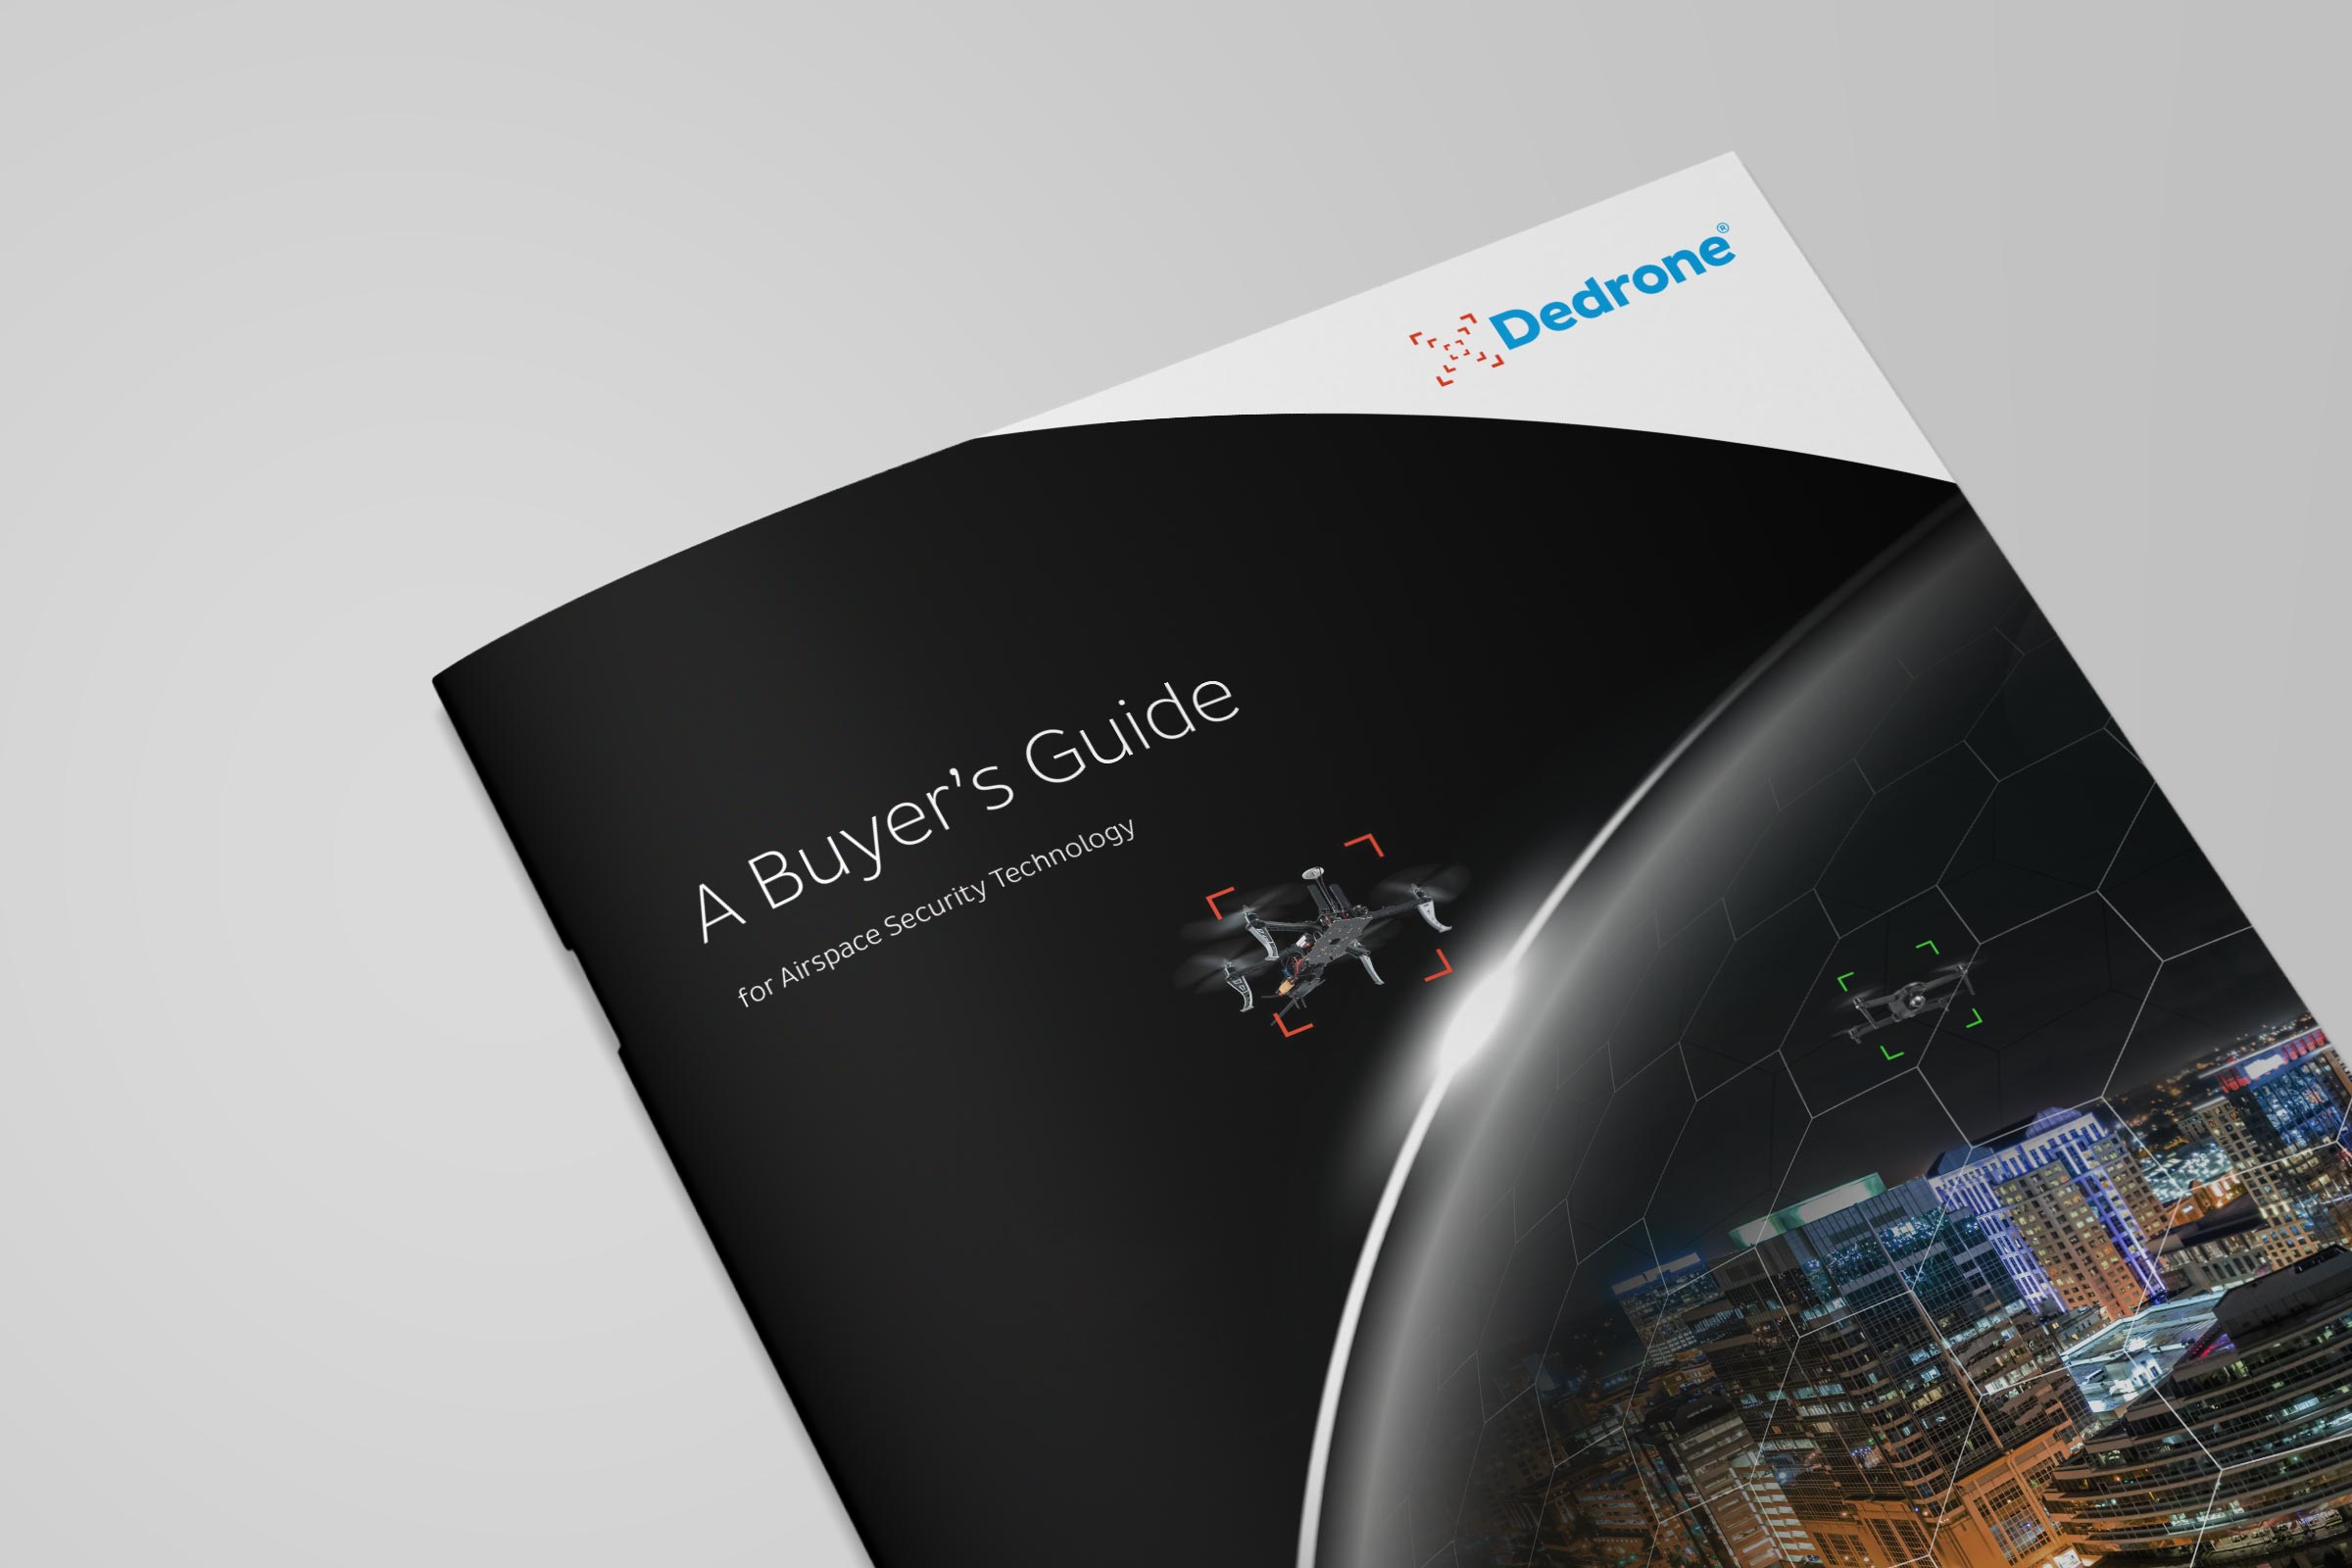 dedrone-whitepaper-cover-big-buyers-guide-2022-1